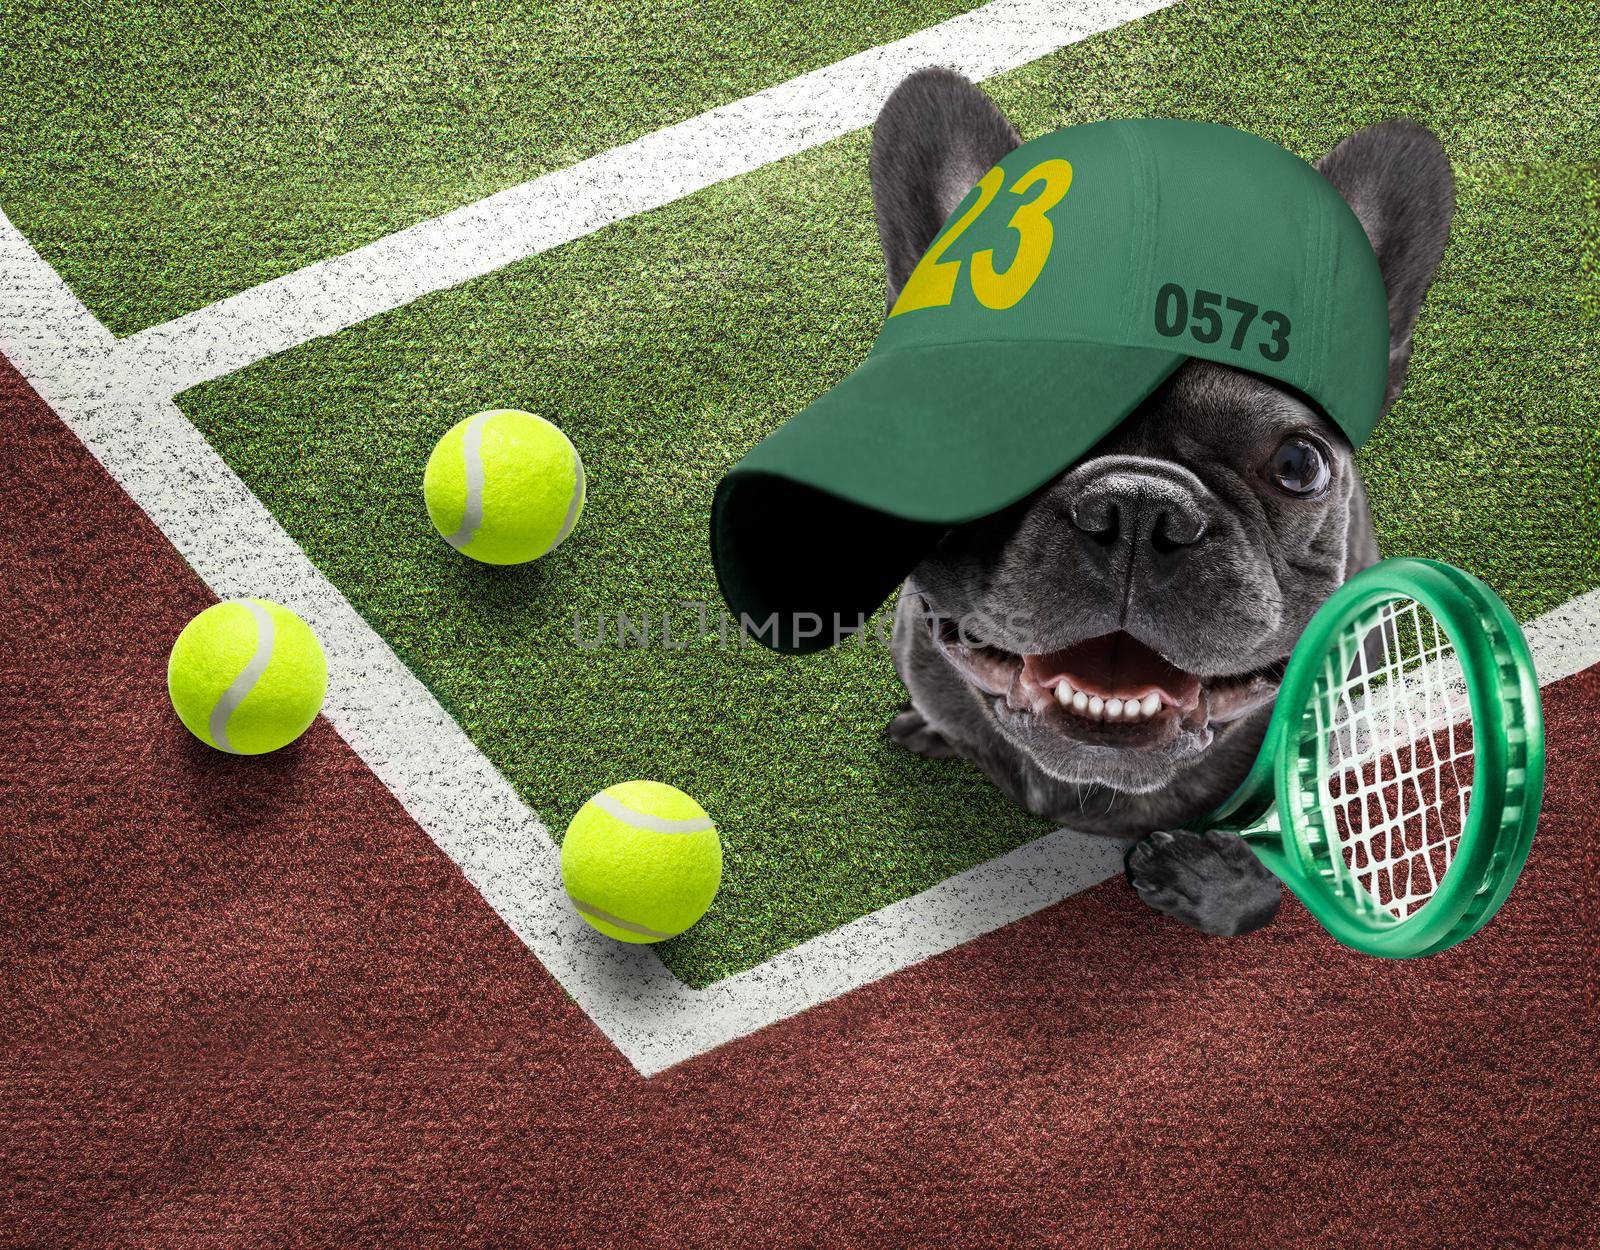 player sporty french bulldog dog on tennis field court with balls, ready for a play or game